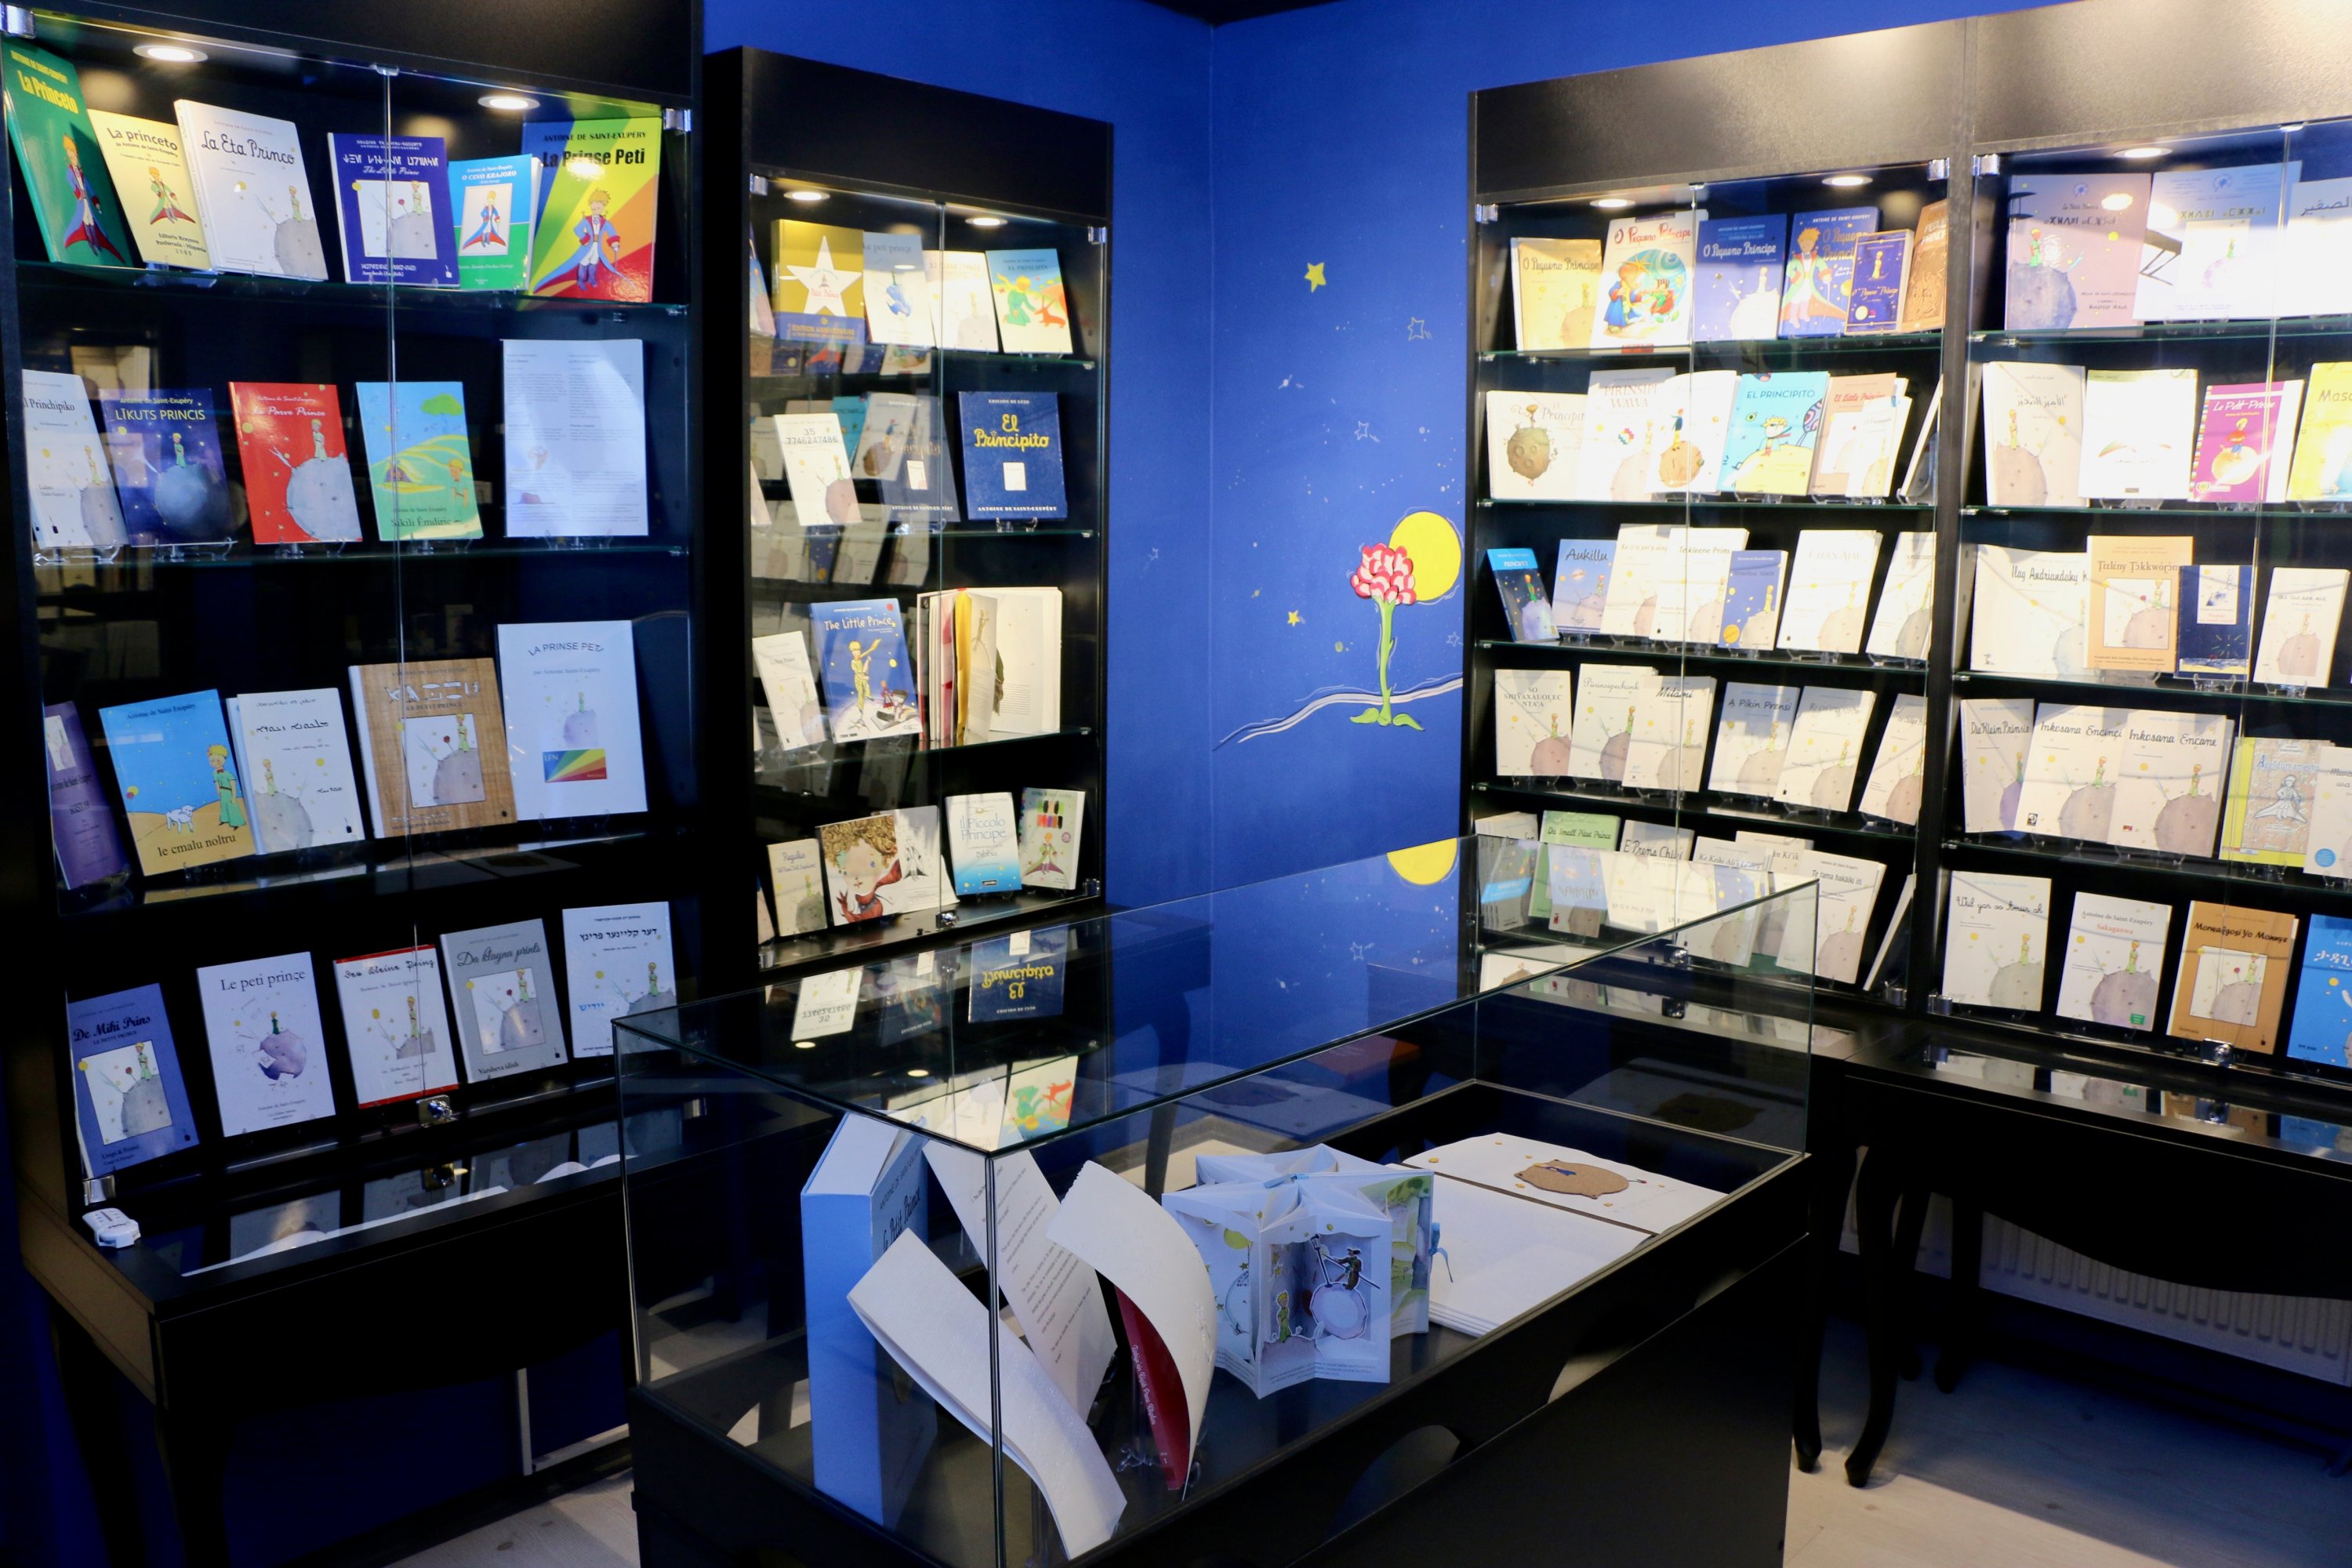 Some editions of “The Little Prince' in different languages are seen at the museum in Eskişehir, Turkey, July 5, 2020. (AA Photo)